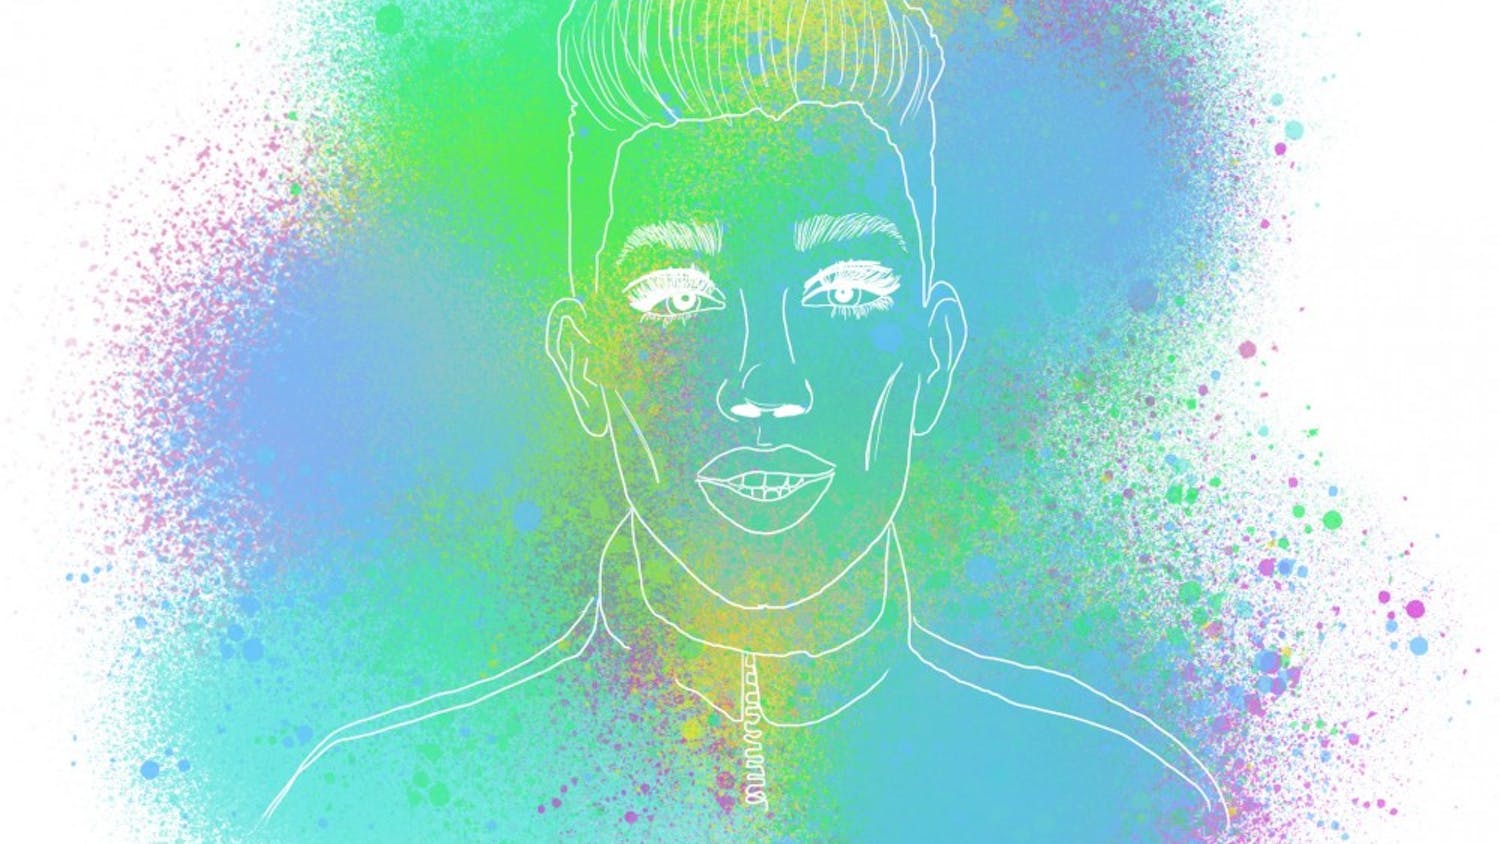 Anne Anderson's illo of James Charles